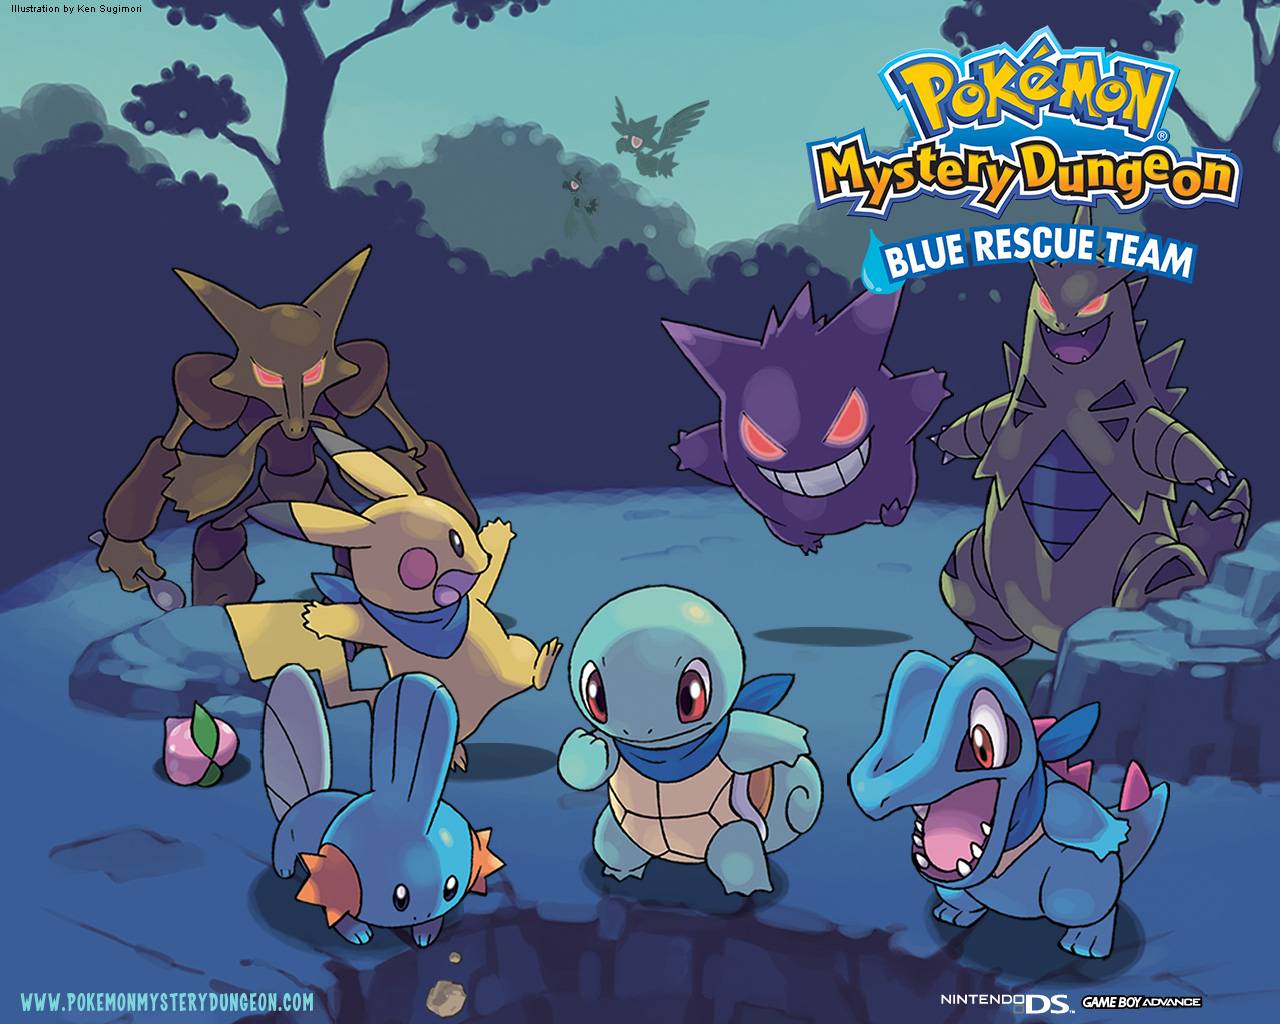 Pokemon Mystery Dungeon Wallpapers 1280x1024